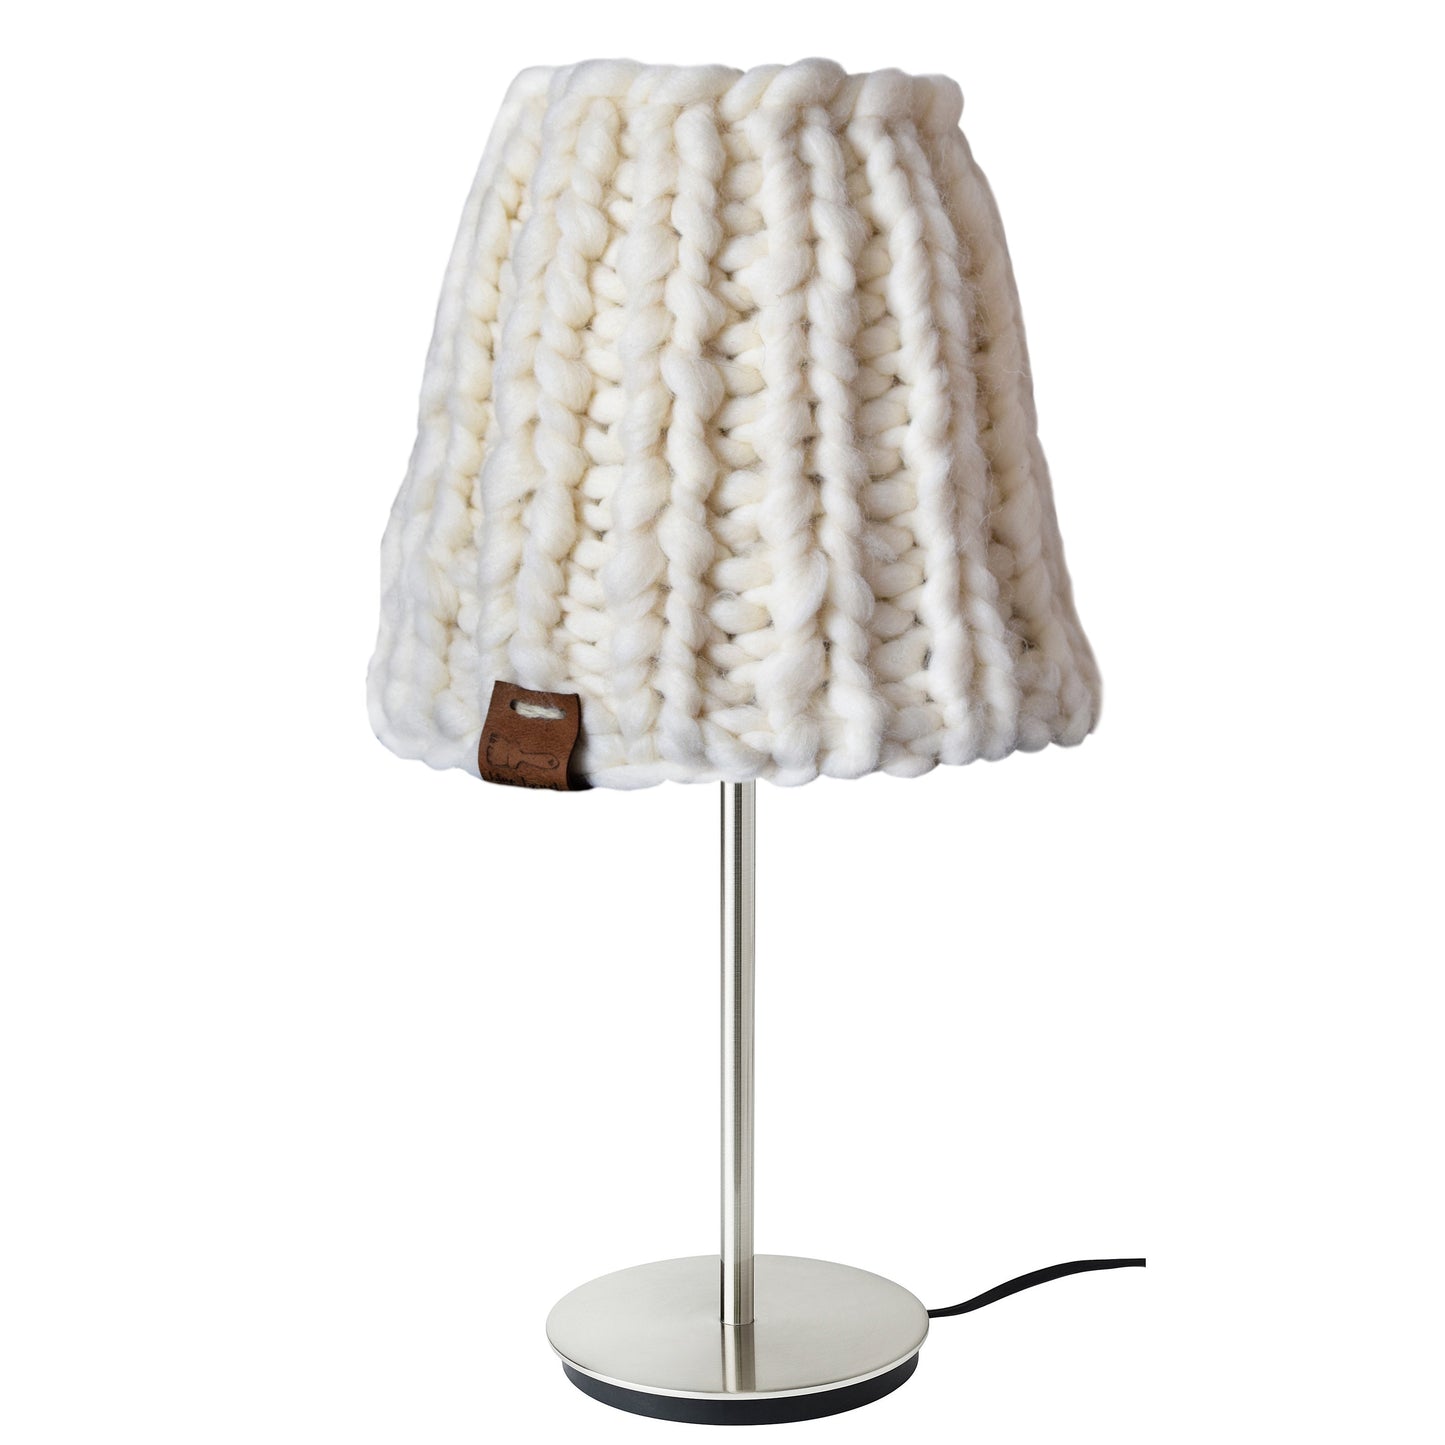 Woolen lampshade, Scandinavian style, Handmade,  Knitted Lampshade , interesting unique lampshade, home decoration, Table Lamp